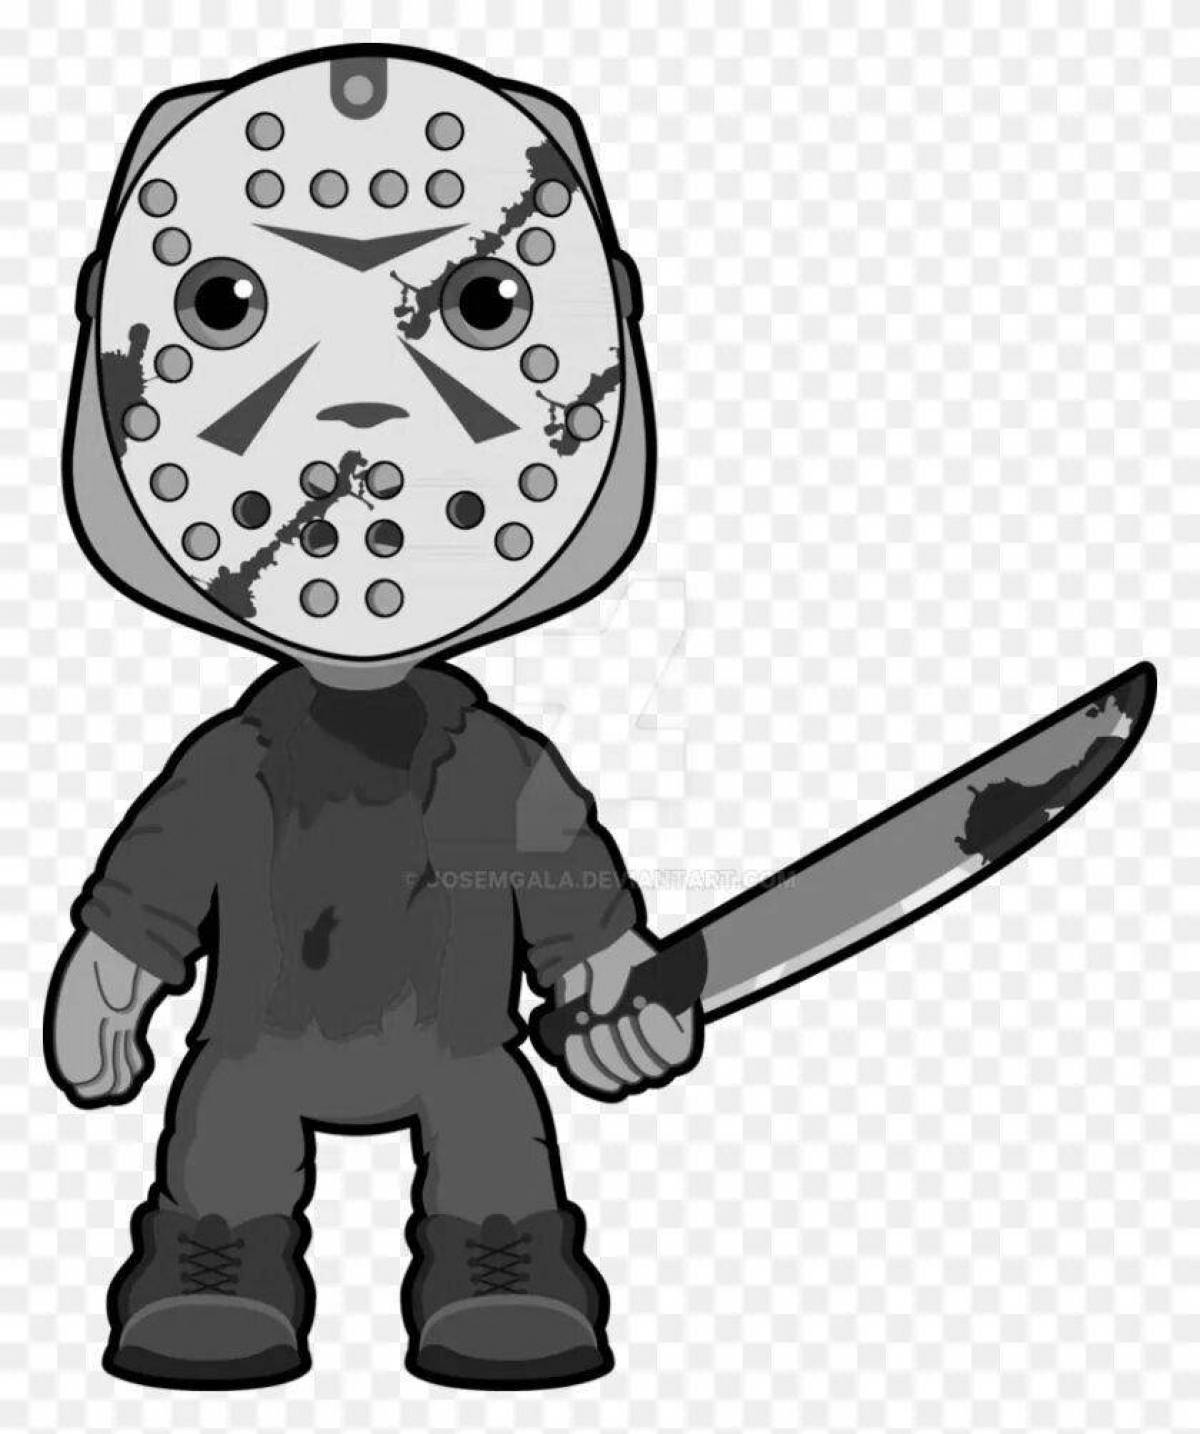 Shocking Friday the 13th coloring book